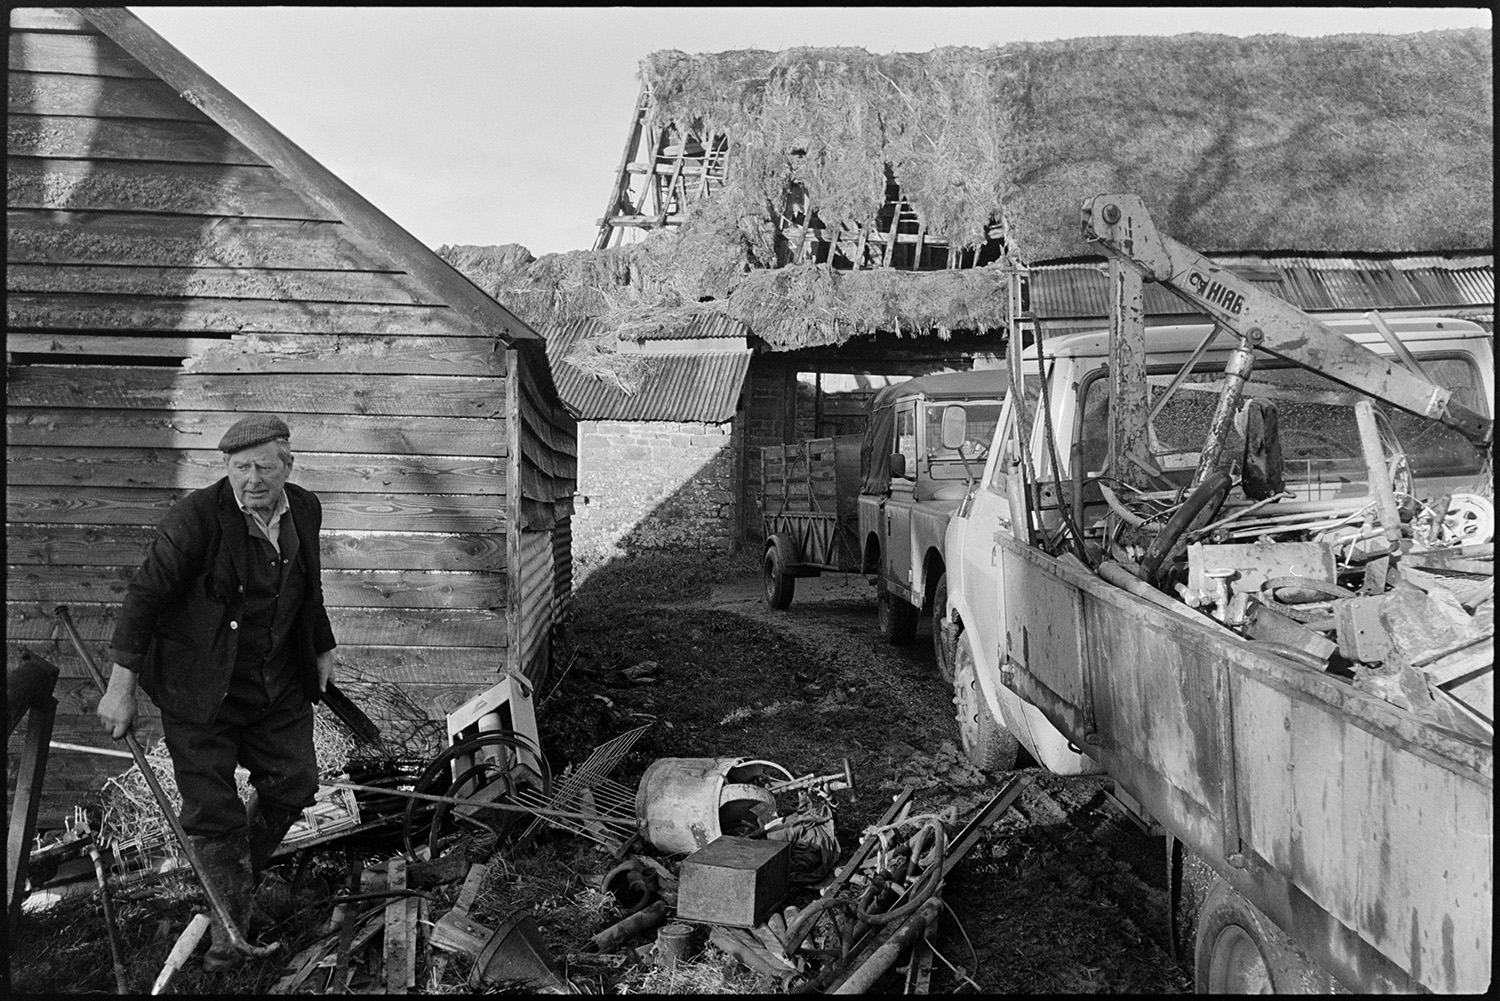 Scrap merchant sorting out scrap at country house sale.
[Scrap merchant Jimmy Hughes sorting out scrap materials at an auction at Colleton Manor, Chulmleigh. He is stood next to a wooden shed and a parked van, Land Rover and trailer. Stone barns with corrugated iron roofing and a collapsing thatched barn are visible in the background.]